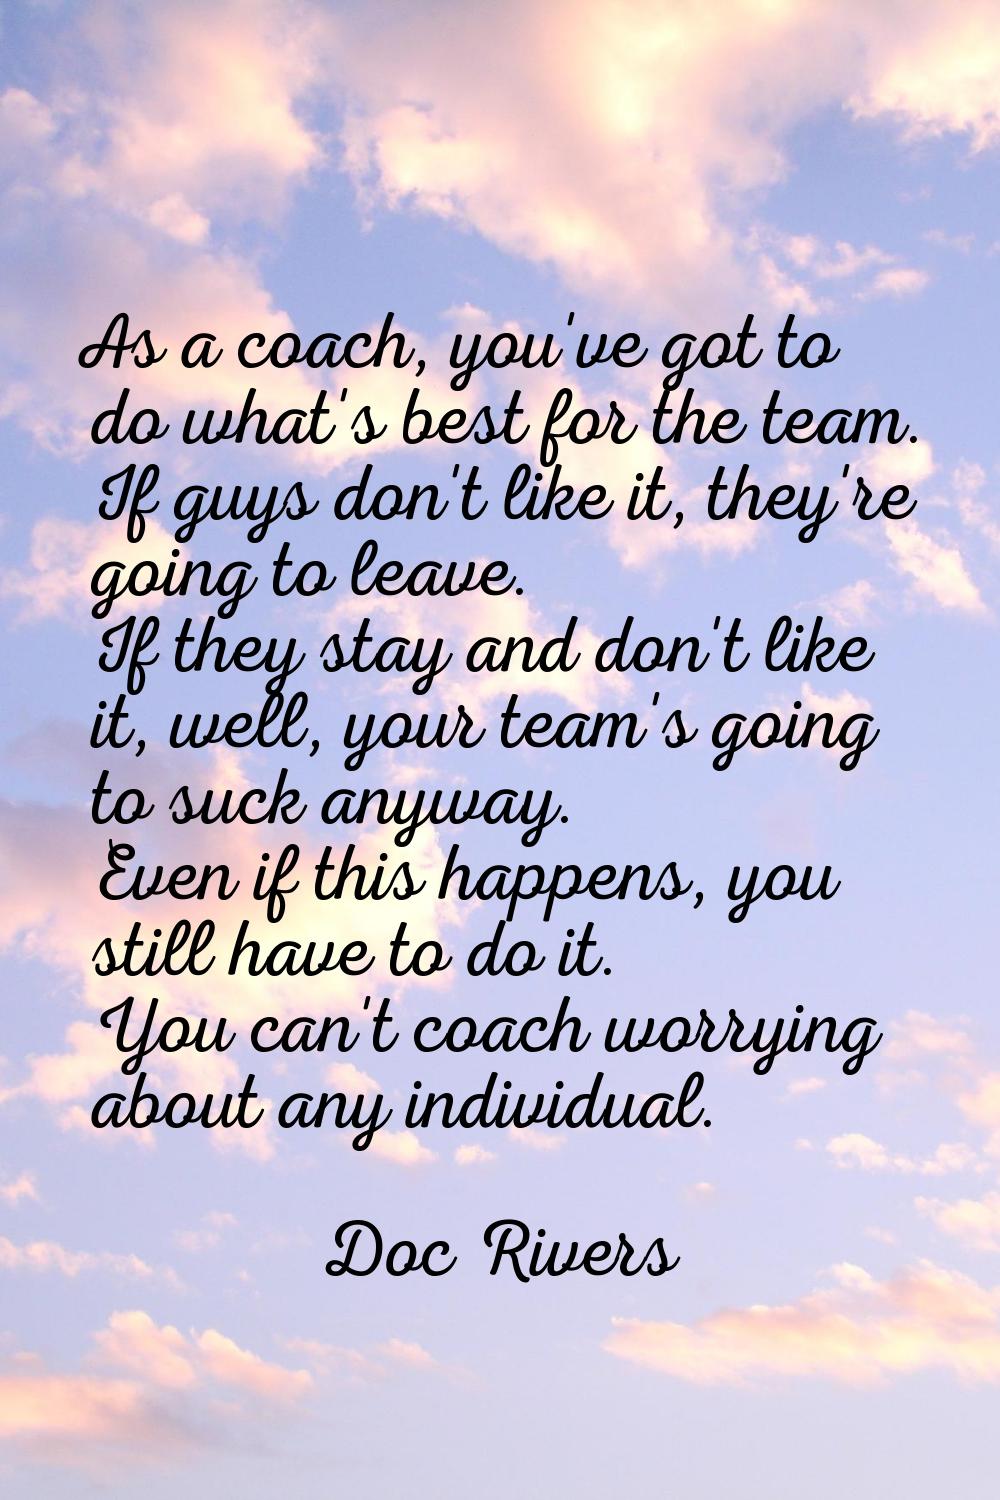 As a coach, you've got to do what's best for the team. If guys don't like it, they're going to leav